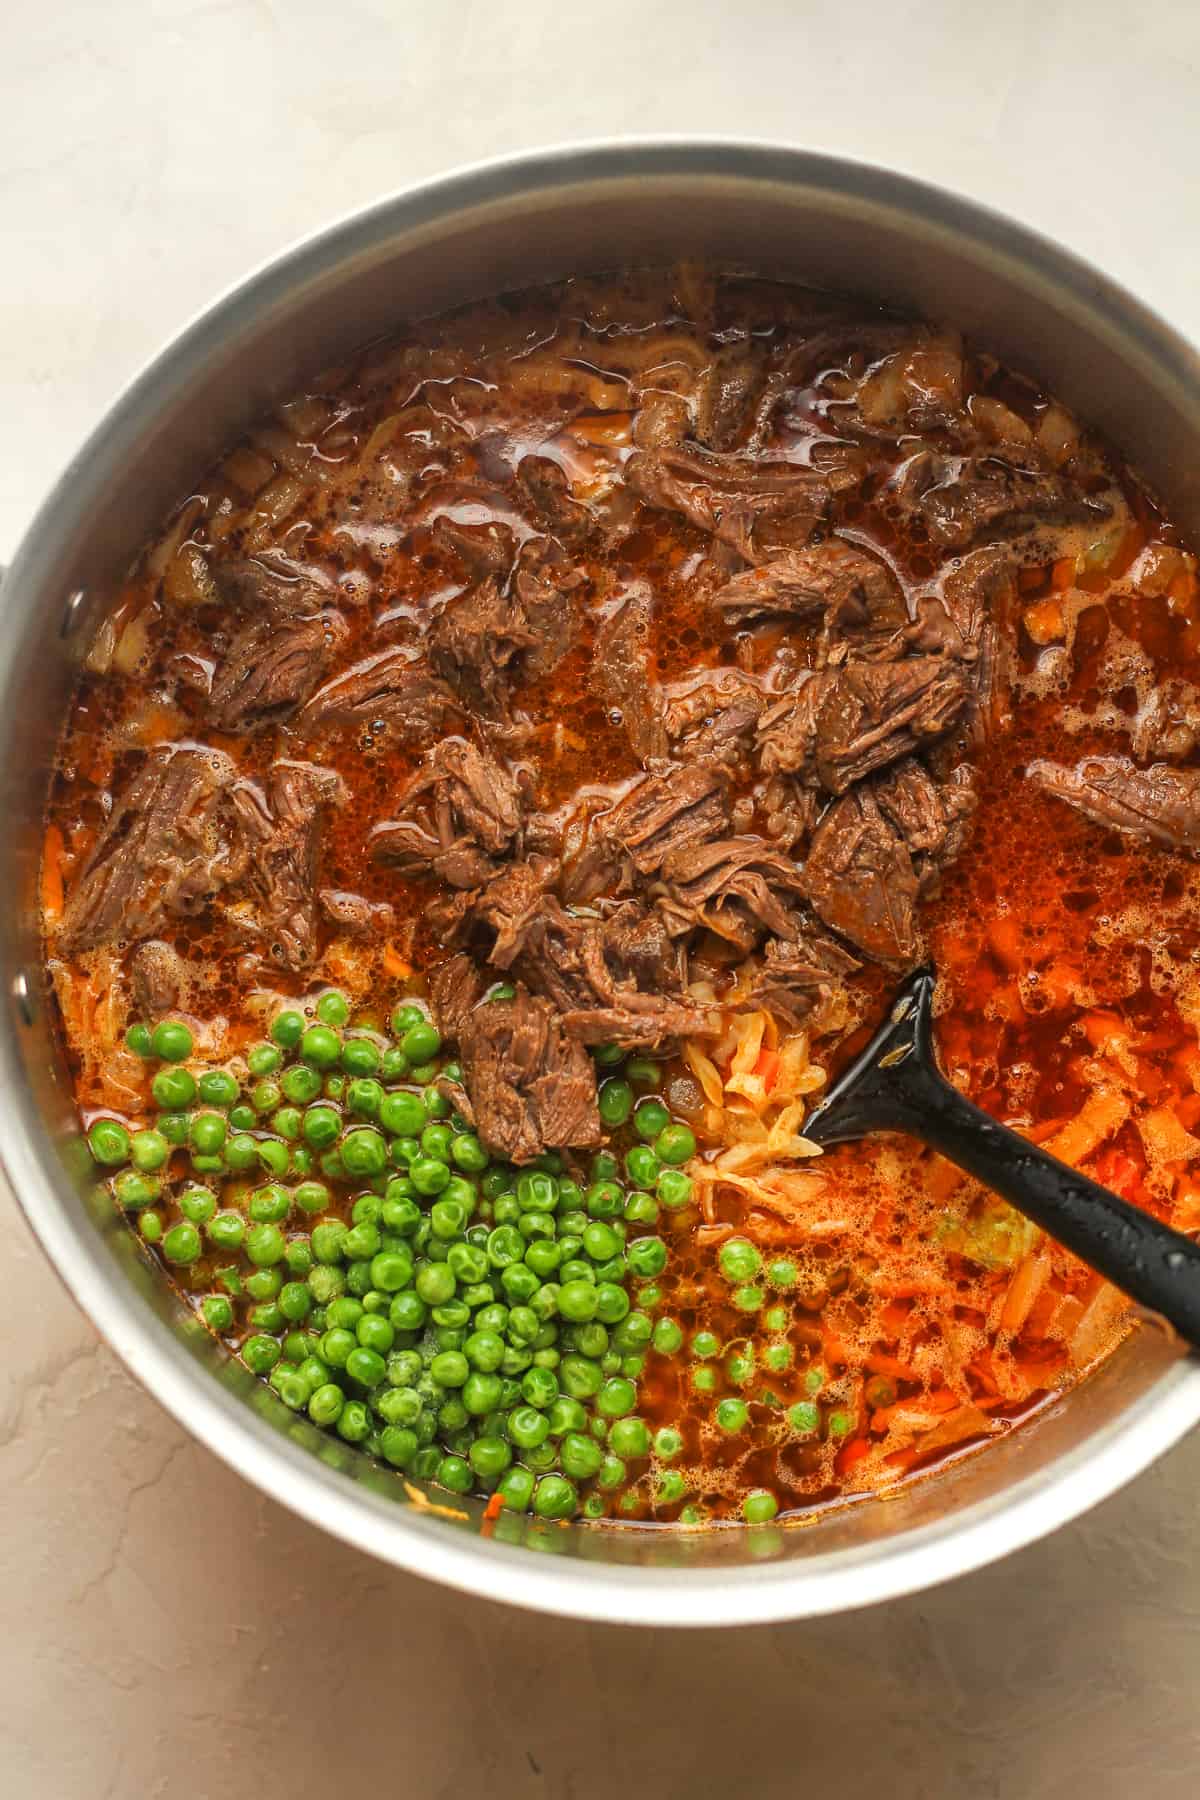 A large pot of soup with shredded beef and peas on top.